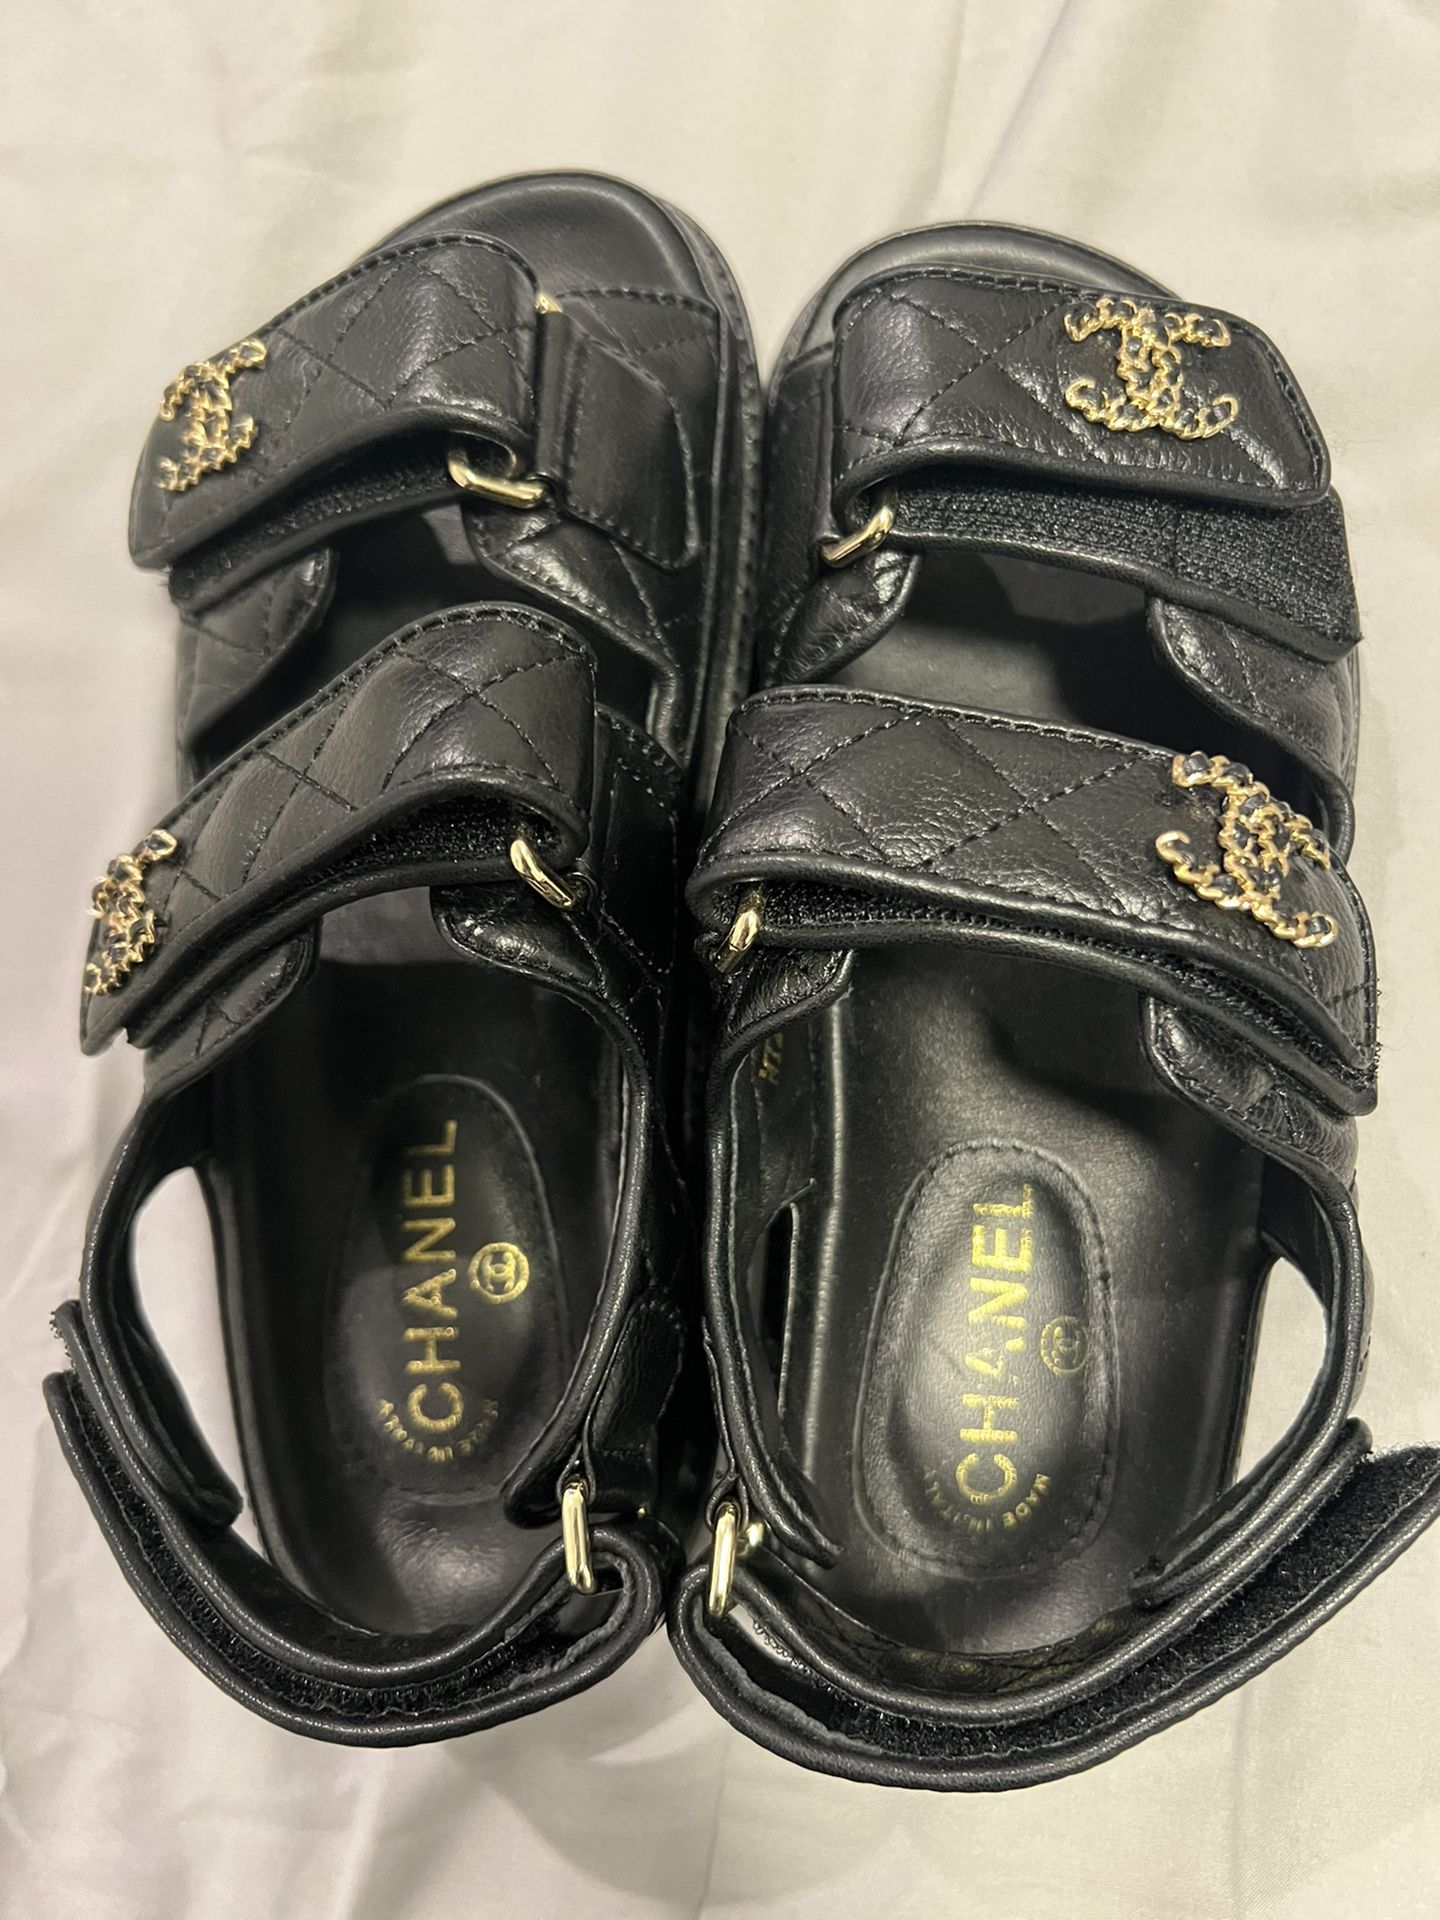 Authentic Chanel Dad Sandals for Sale in New York, NY - OfferUp